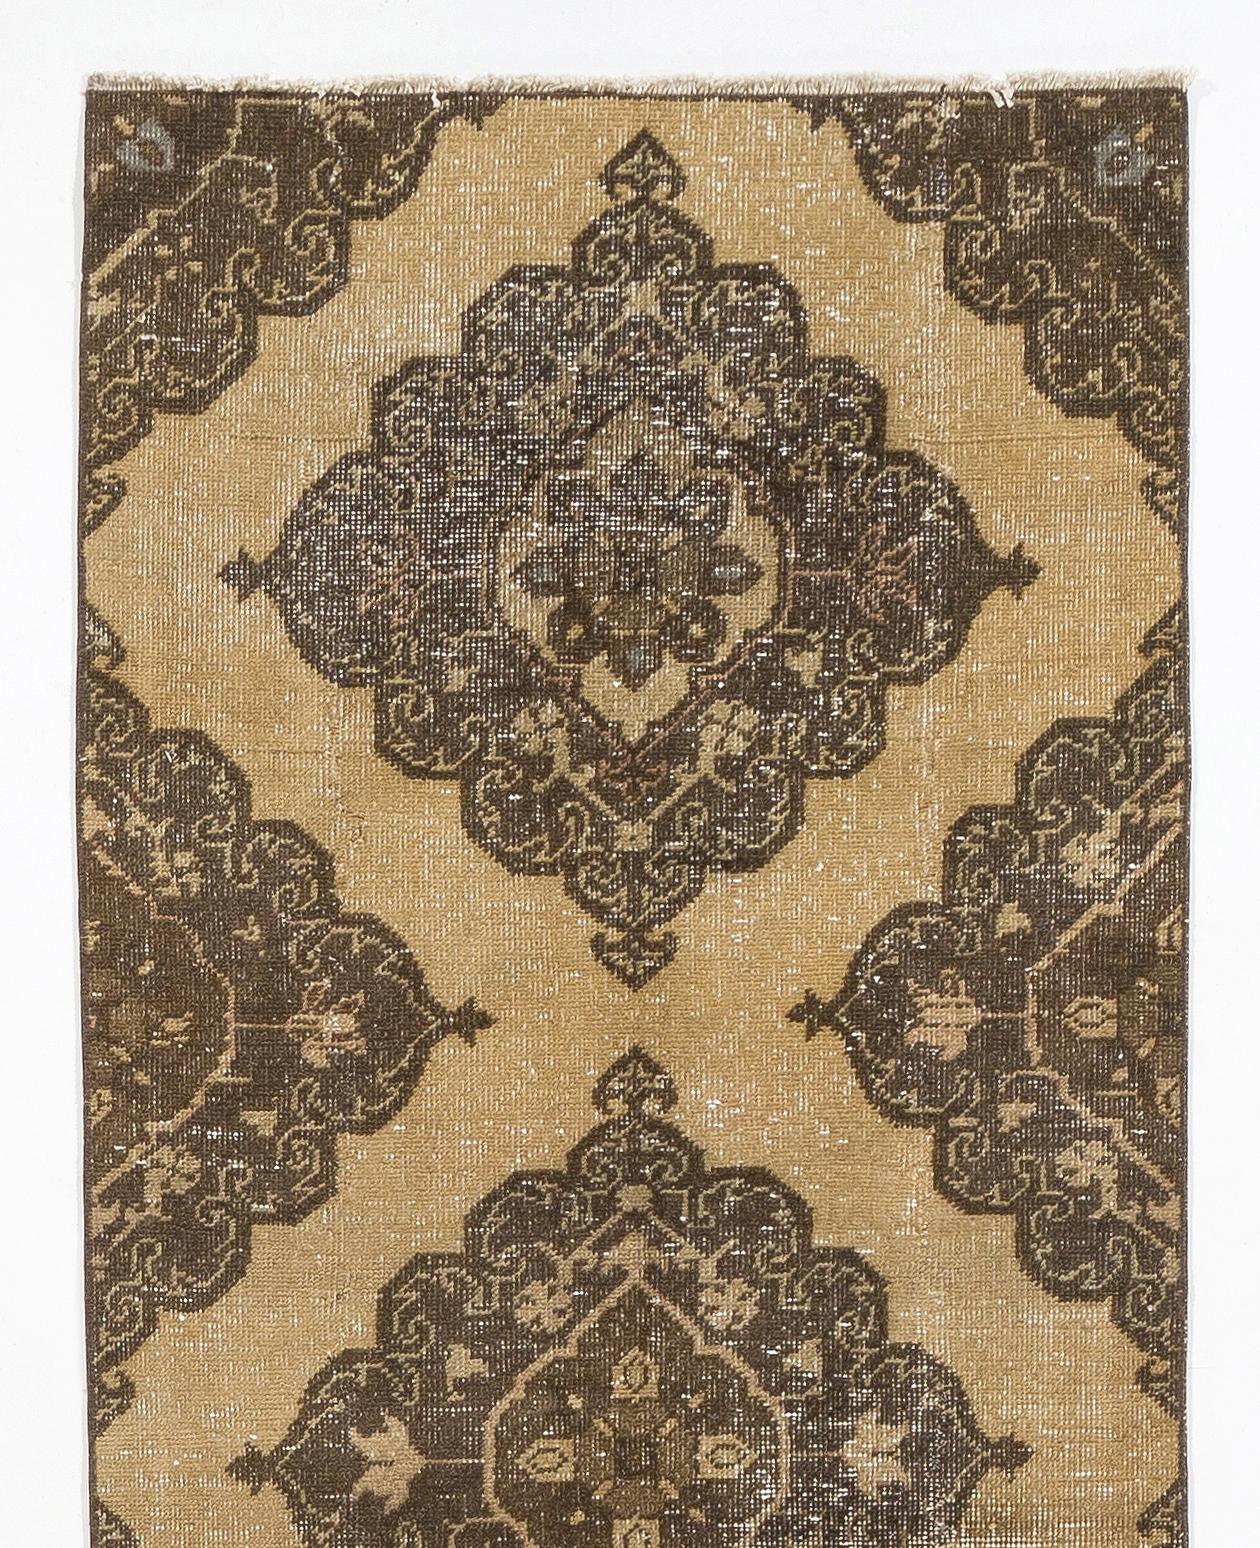 A vintage Turkish runner rug in beige and brown colors. It was hand-knotted in the 1960s with low wool on cotton foundation and features a multiple geometric medallion design. It is in very good condition, professionally-washed, sturdy and suitable